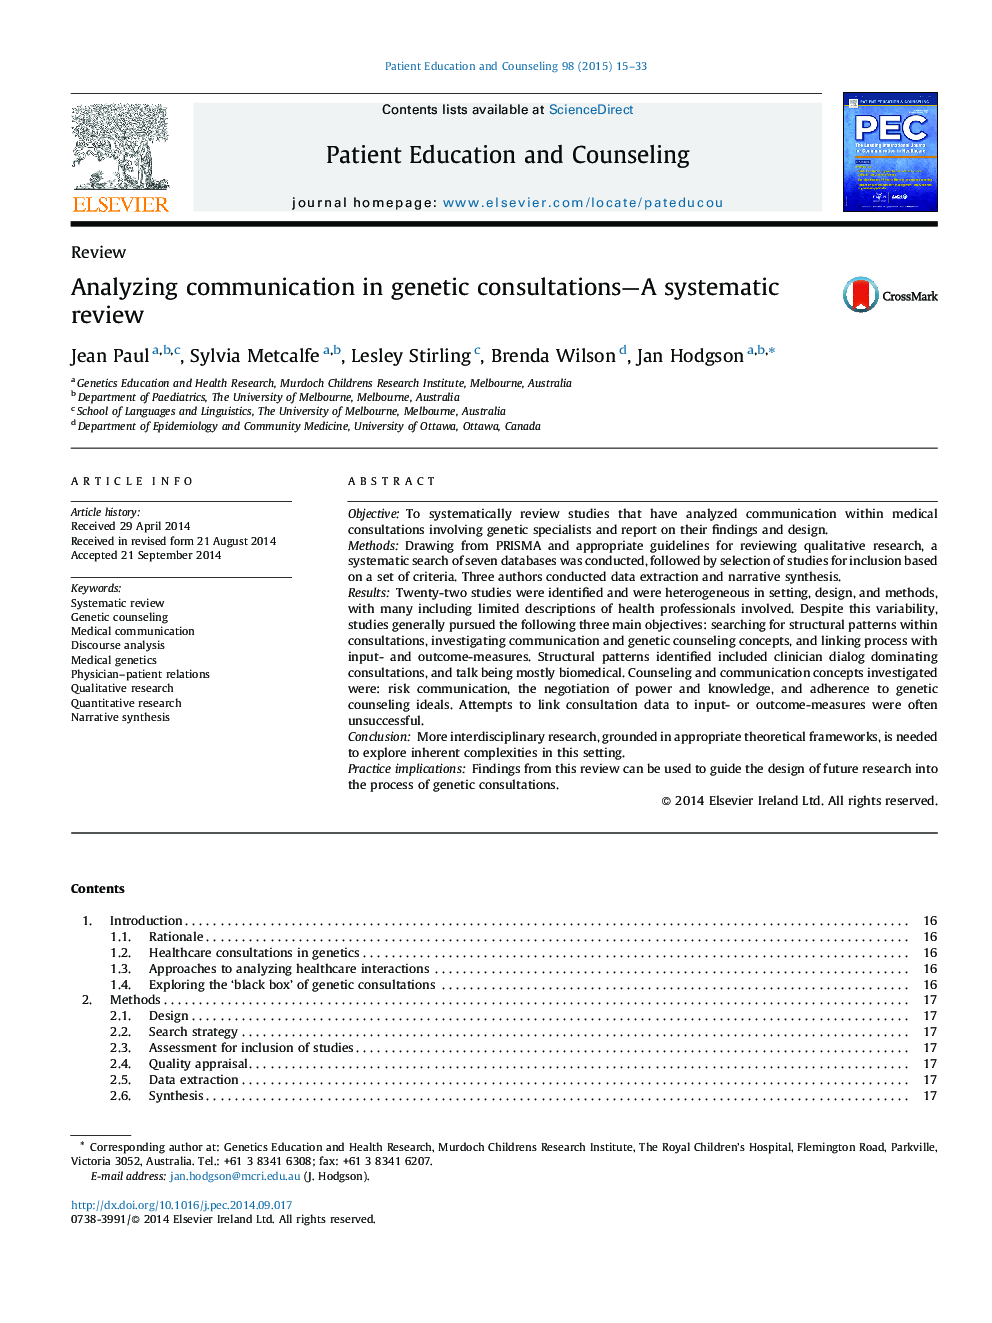 Analyzing communication in genetic consultations—A systematic review